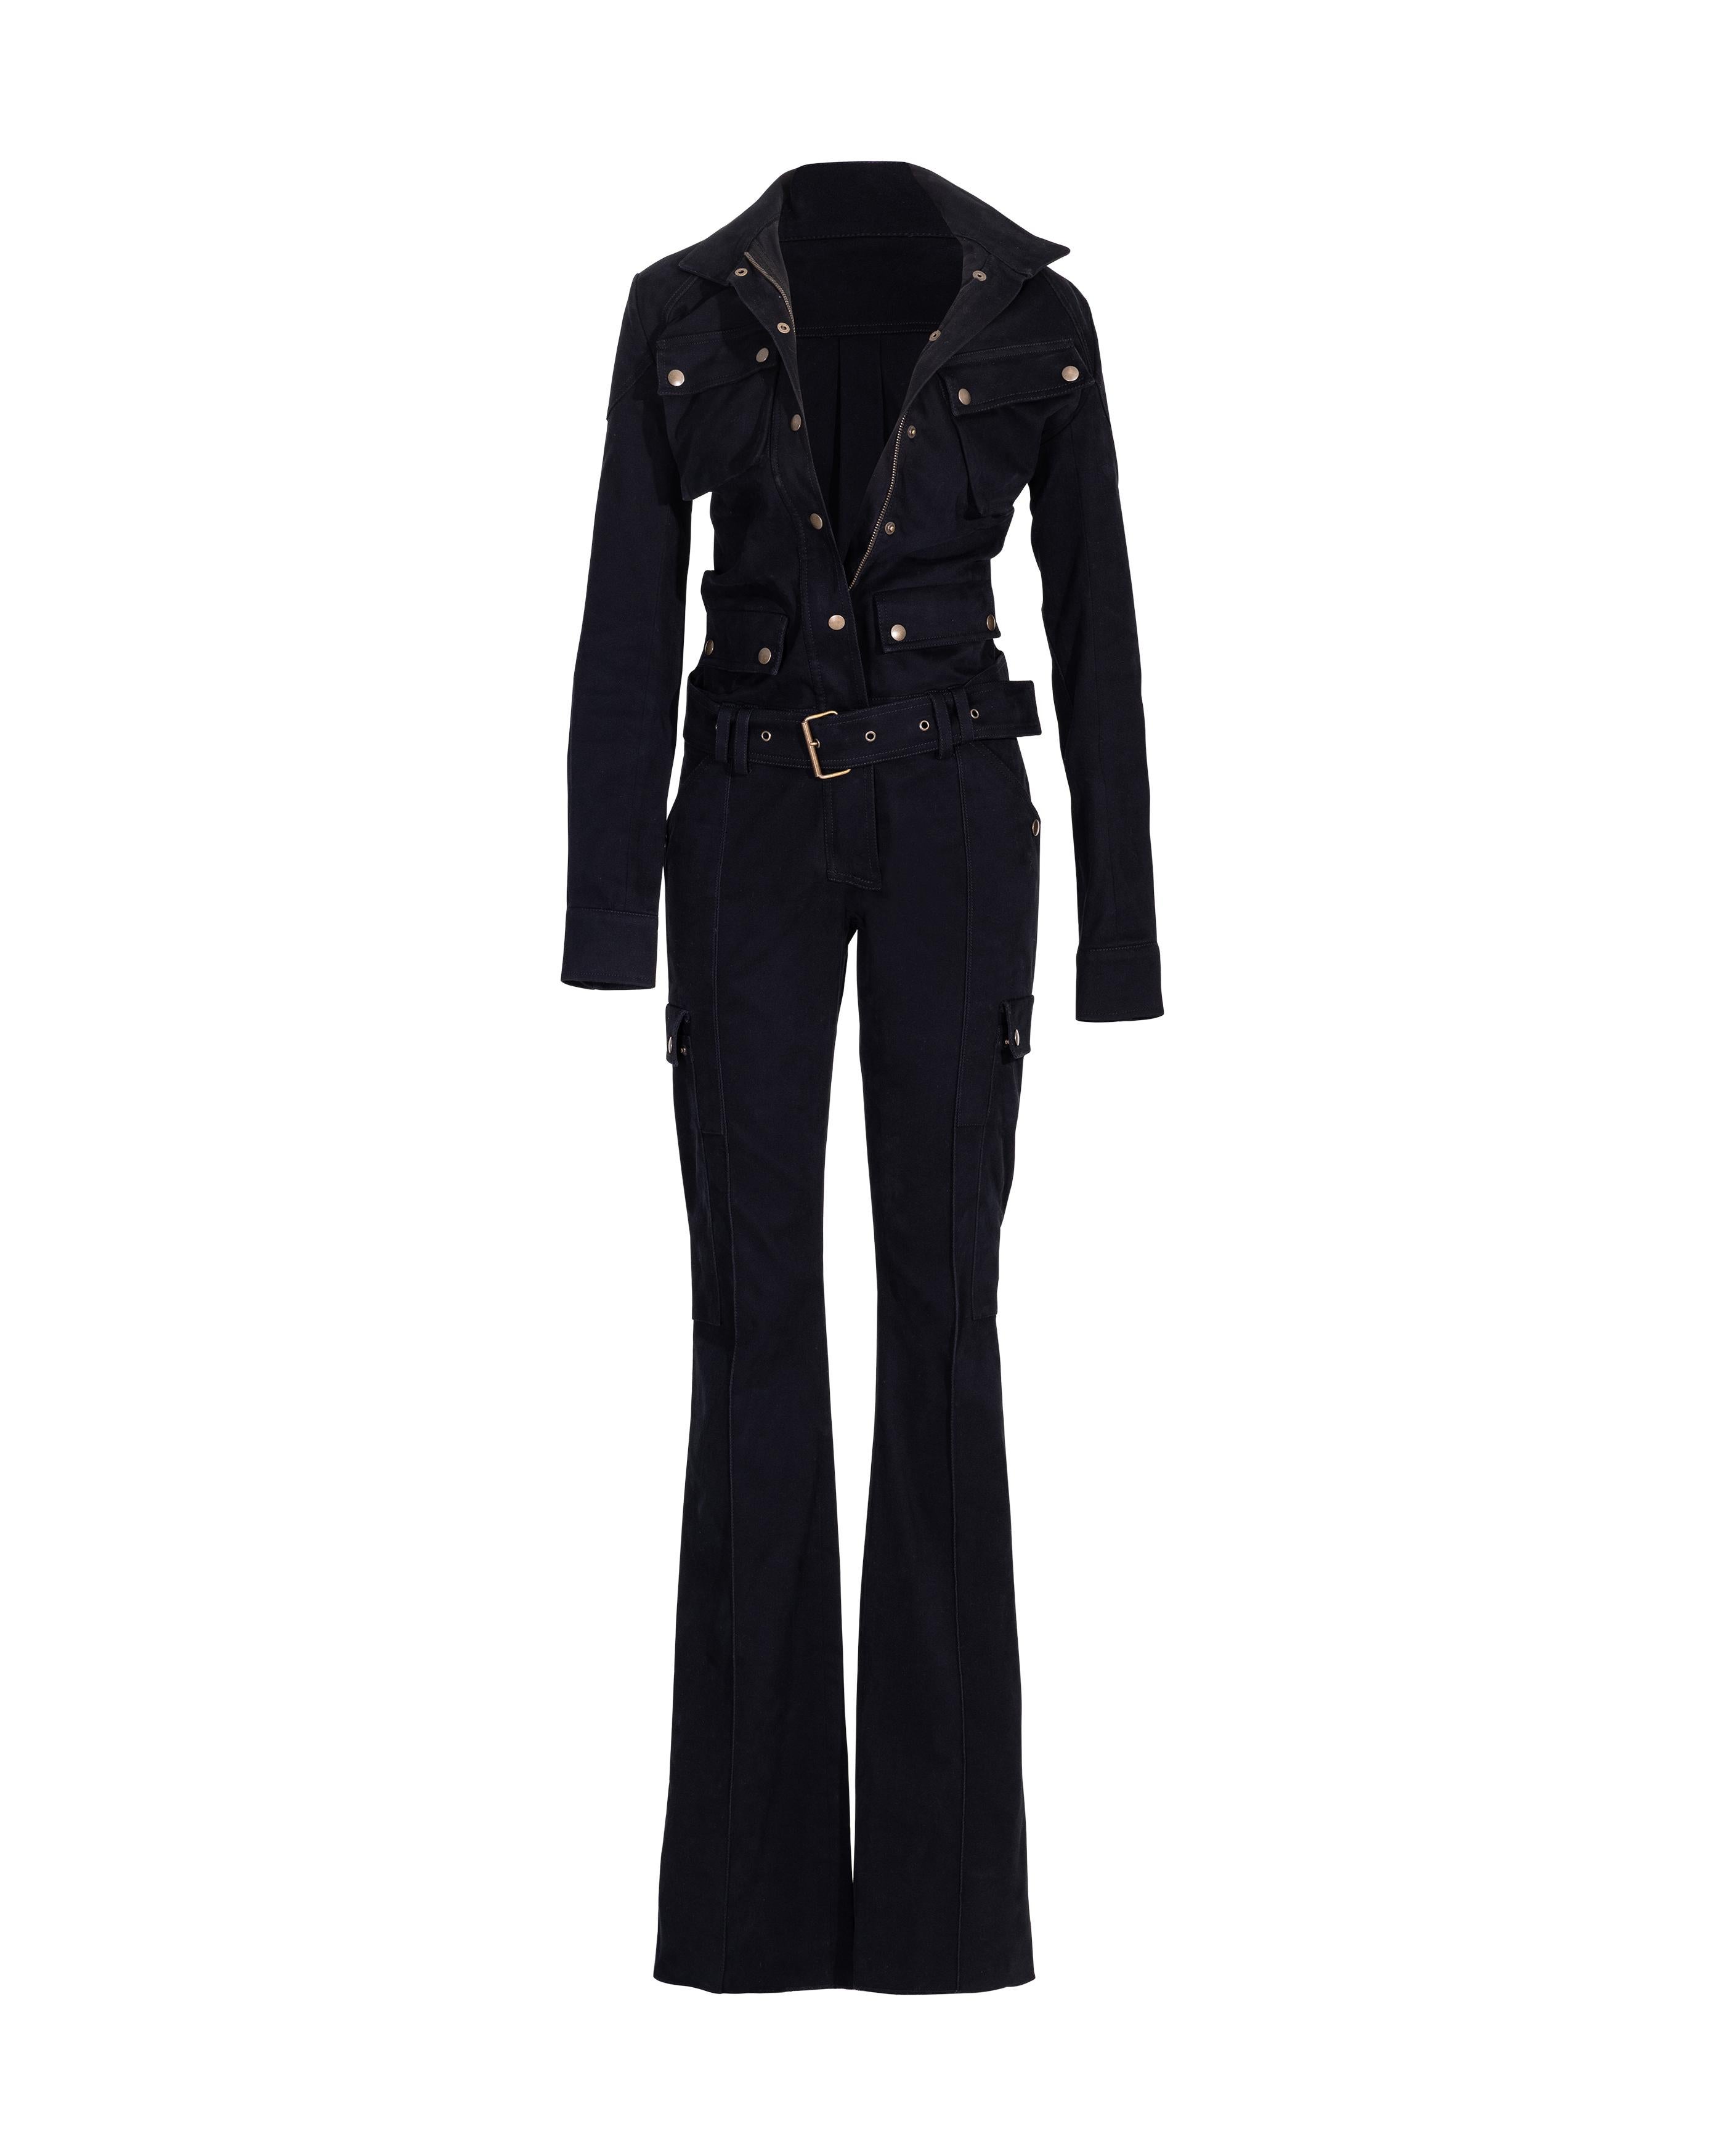 A/W 2001 Balenciaga by Nicolas Ghesquiere Black Jumpsuit with Bronze Hardware For Sale 4